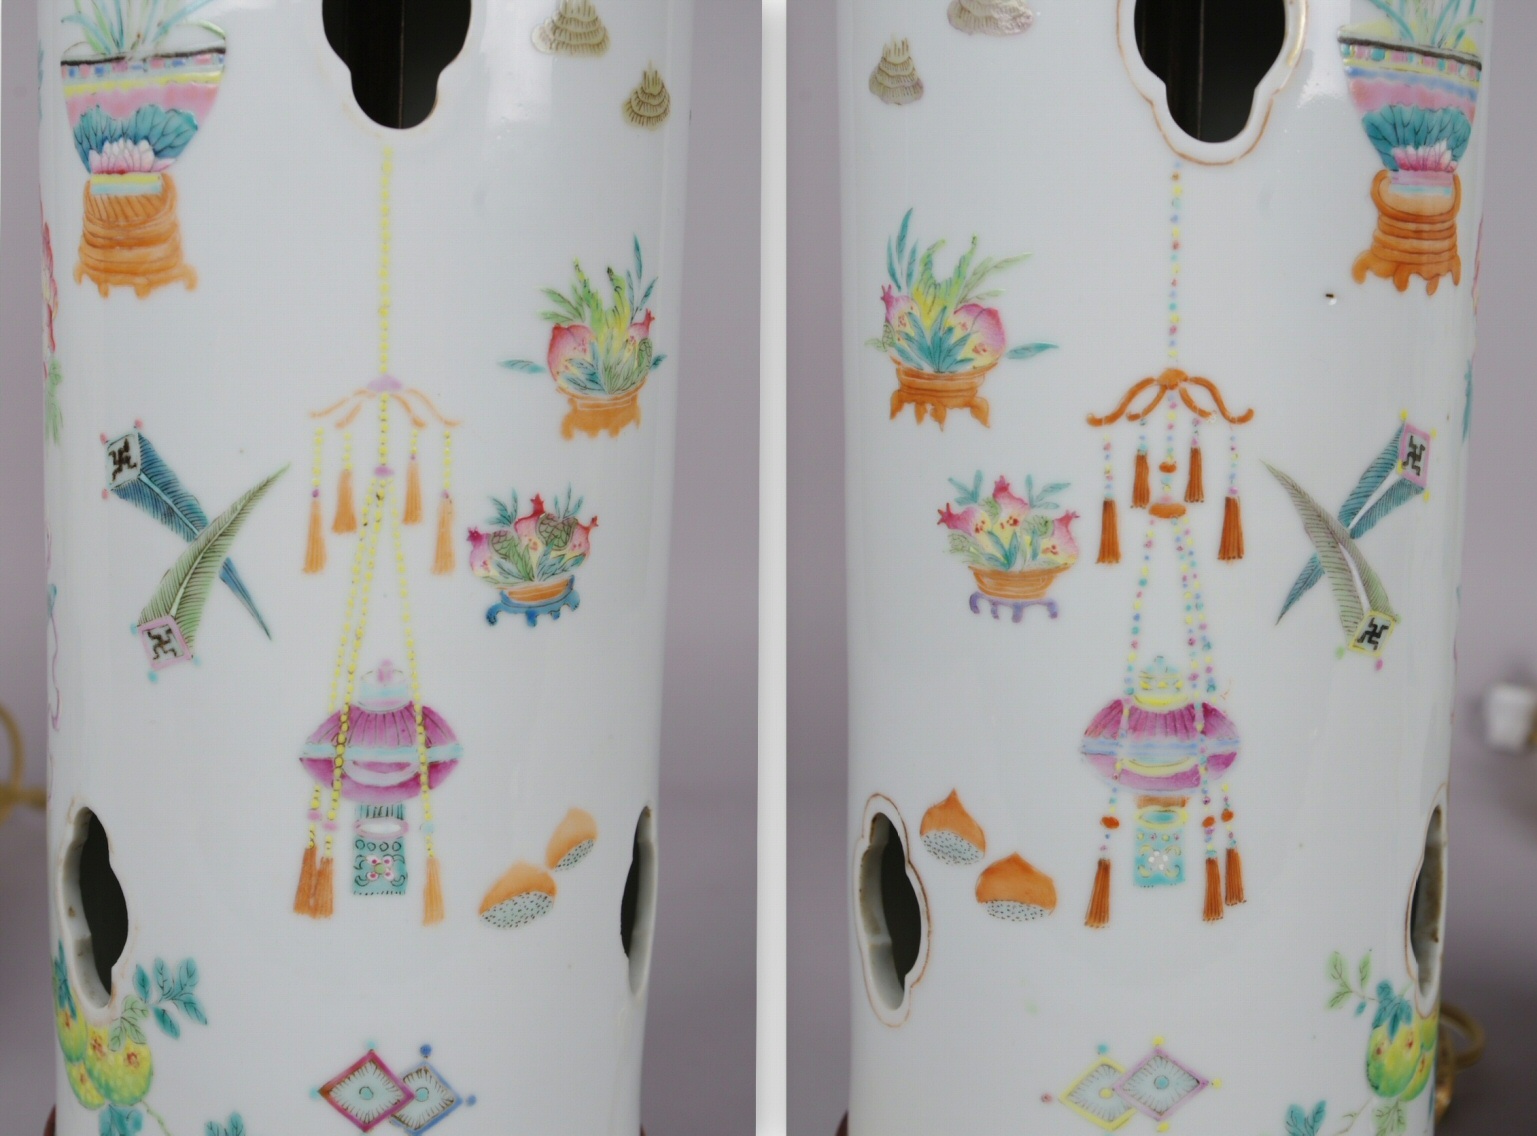 Pair of Chinese Porcelain Hat Stands Mounted as Lamps